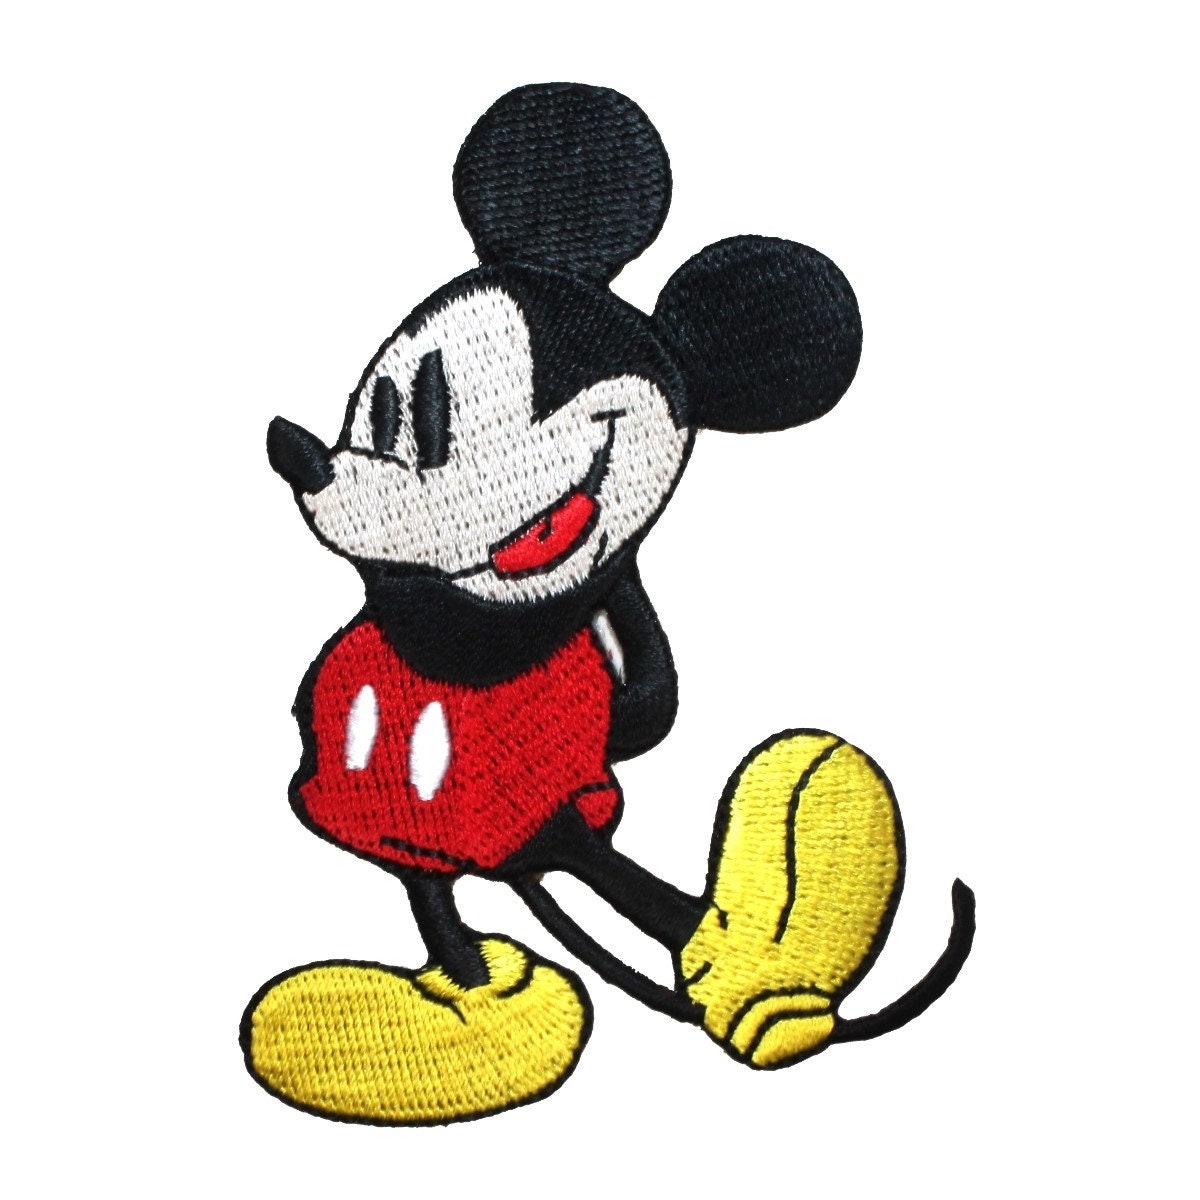 Mickey Iron on Patch, Mickey Patches, Mickey Patches Iron on